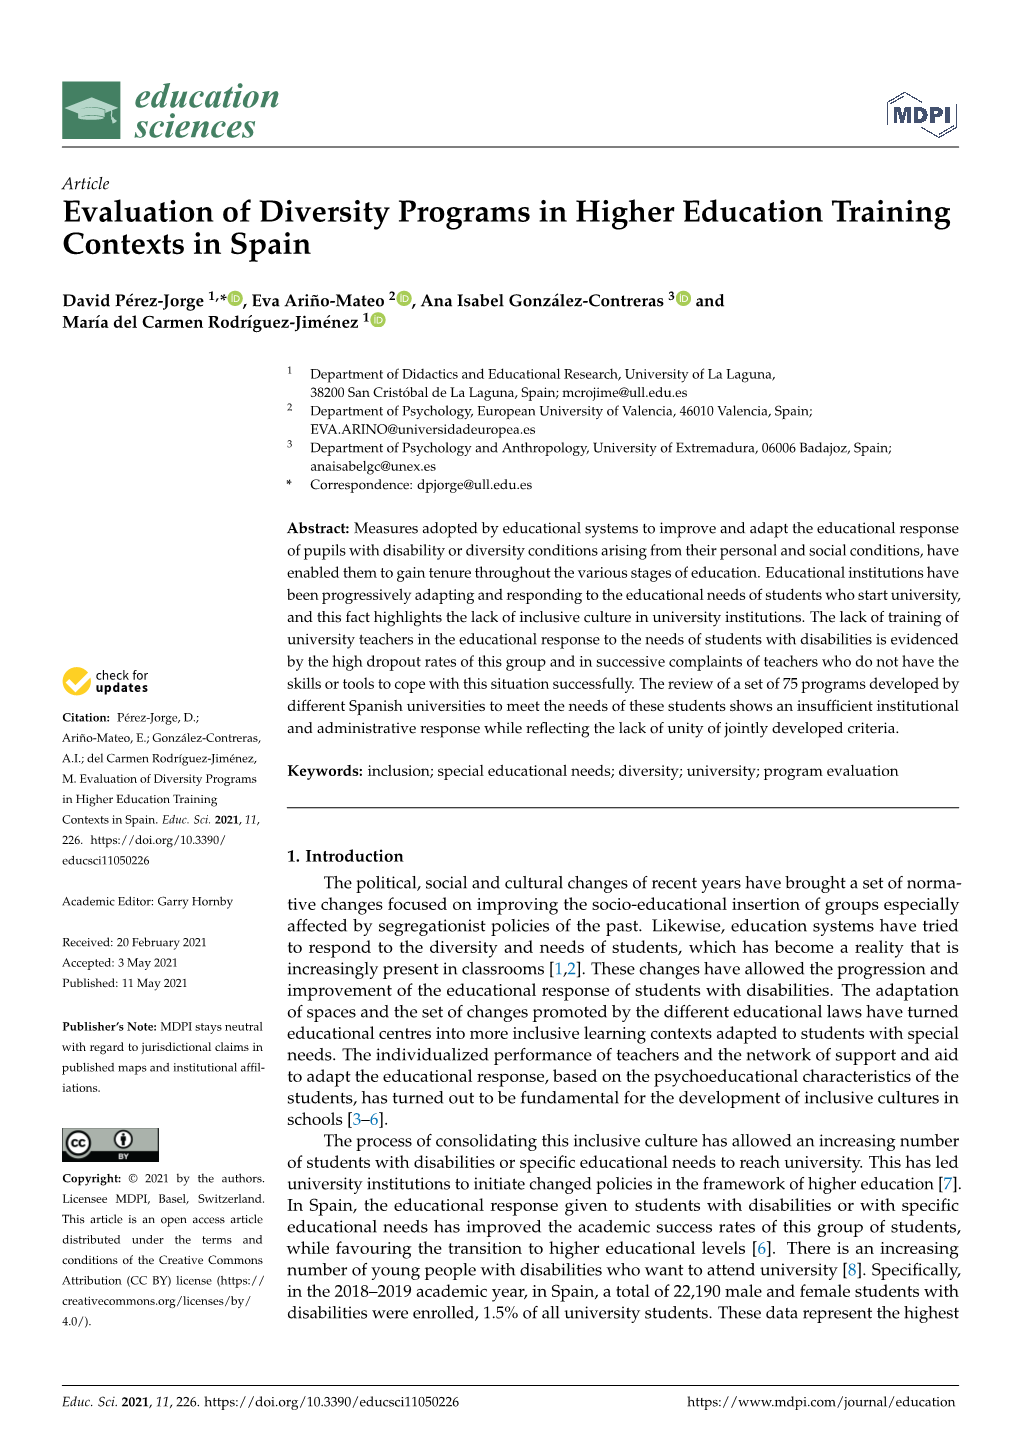 Evaluation of Diversity Programs in Higher Education Training Contexts in Spain